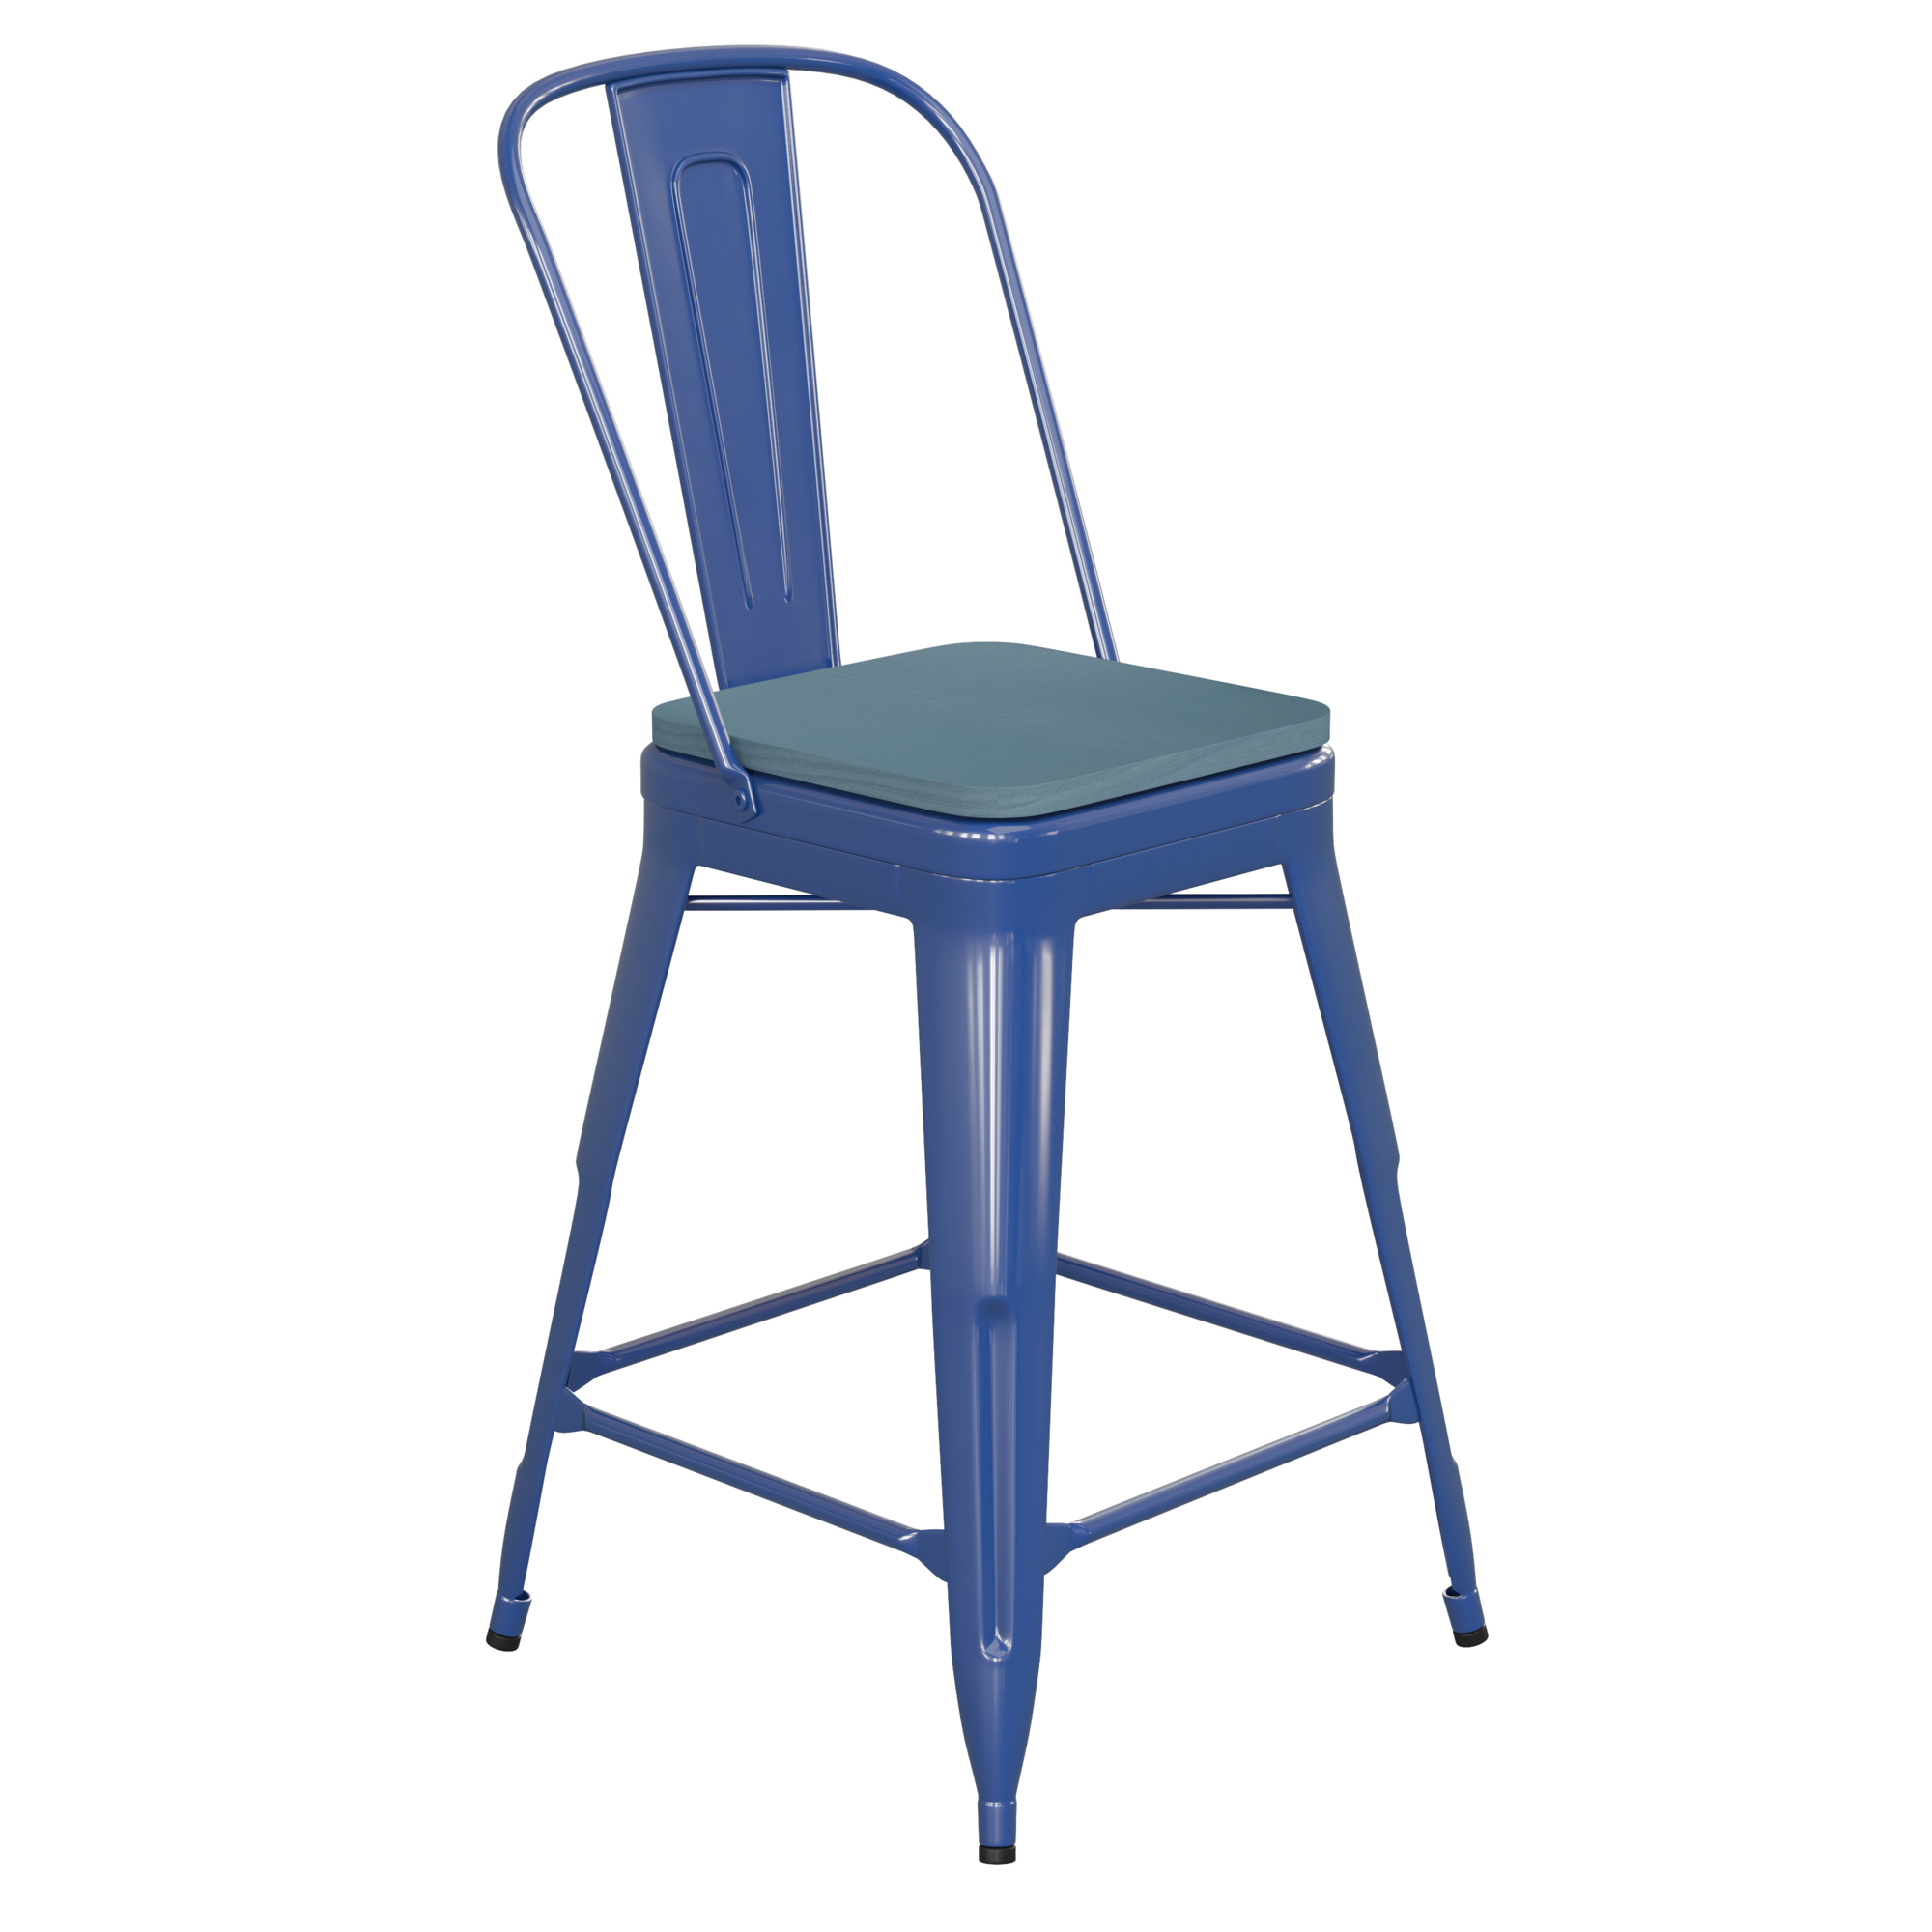 Flash Furniture, 24Inch Blue Metal Counter Stool-Teal Poly Seat, Primary Color Blue, Included (qty.) 1, Model CH3132024GBLP2C